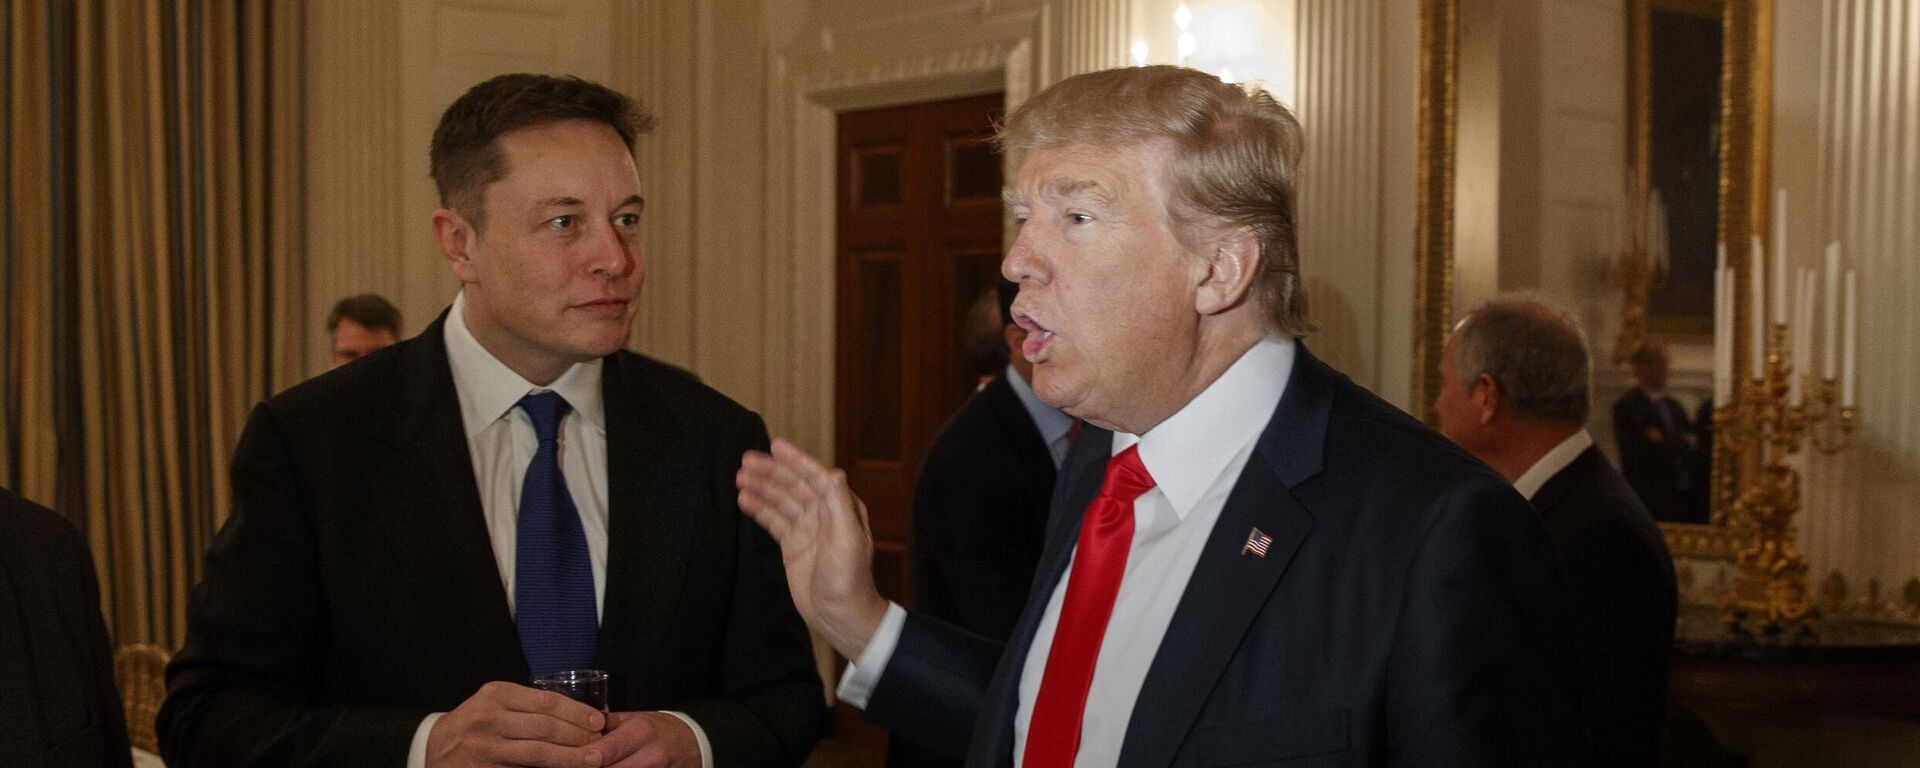 President Donald Trump talks with Tesla and SpaceX CEO Elon Musk, center, and White House chief strategist Steve Bannon during a meeting with business leaders in the State Dining Room of the White House in Washington, Friday, Feb. 3, 2017 - Sputnik International, 1920, 19.11.2022